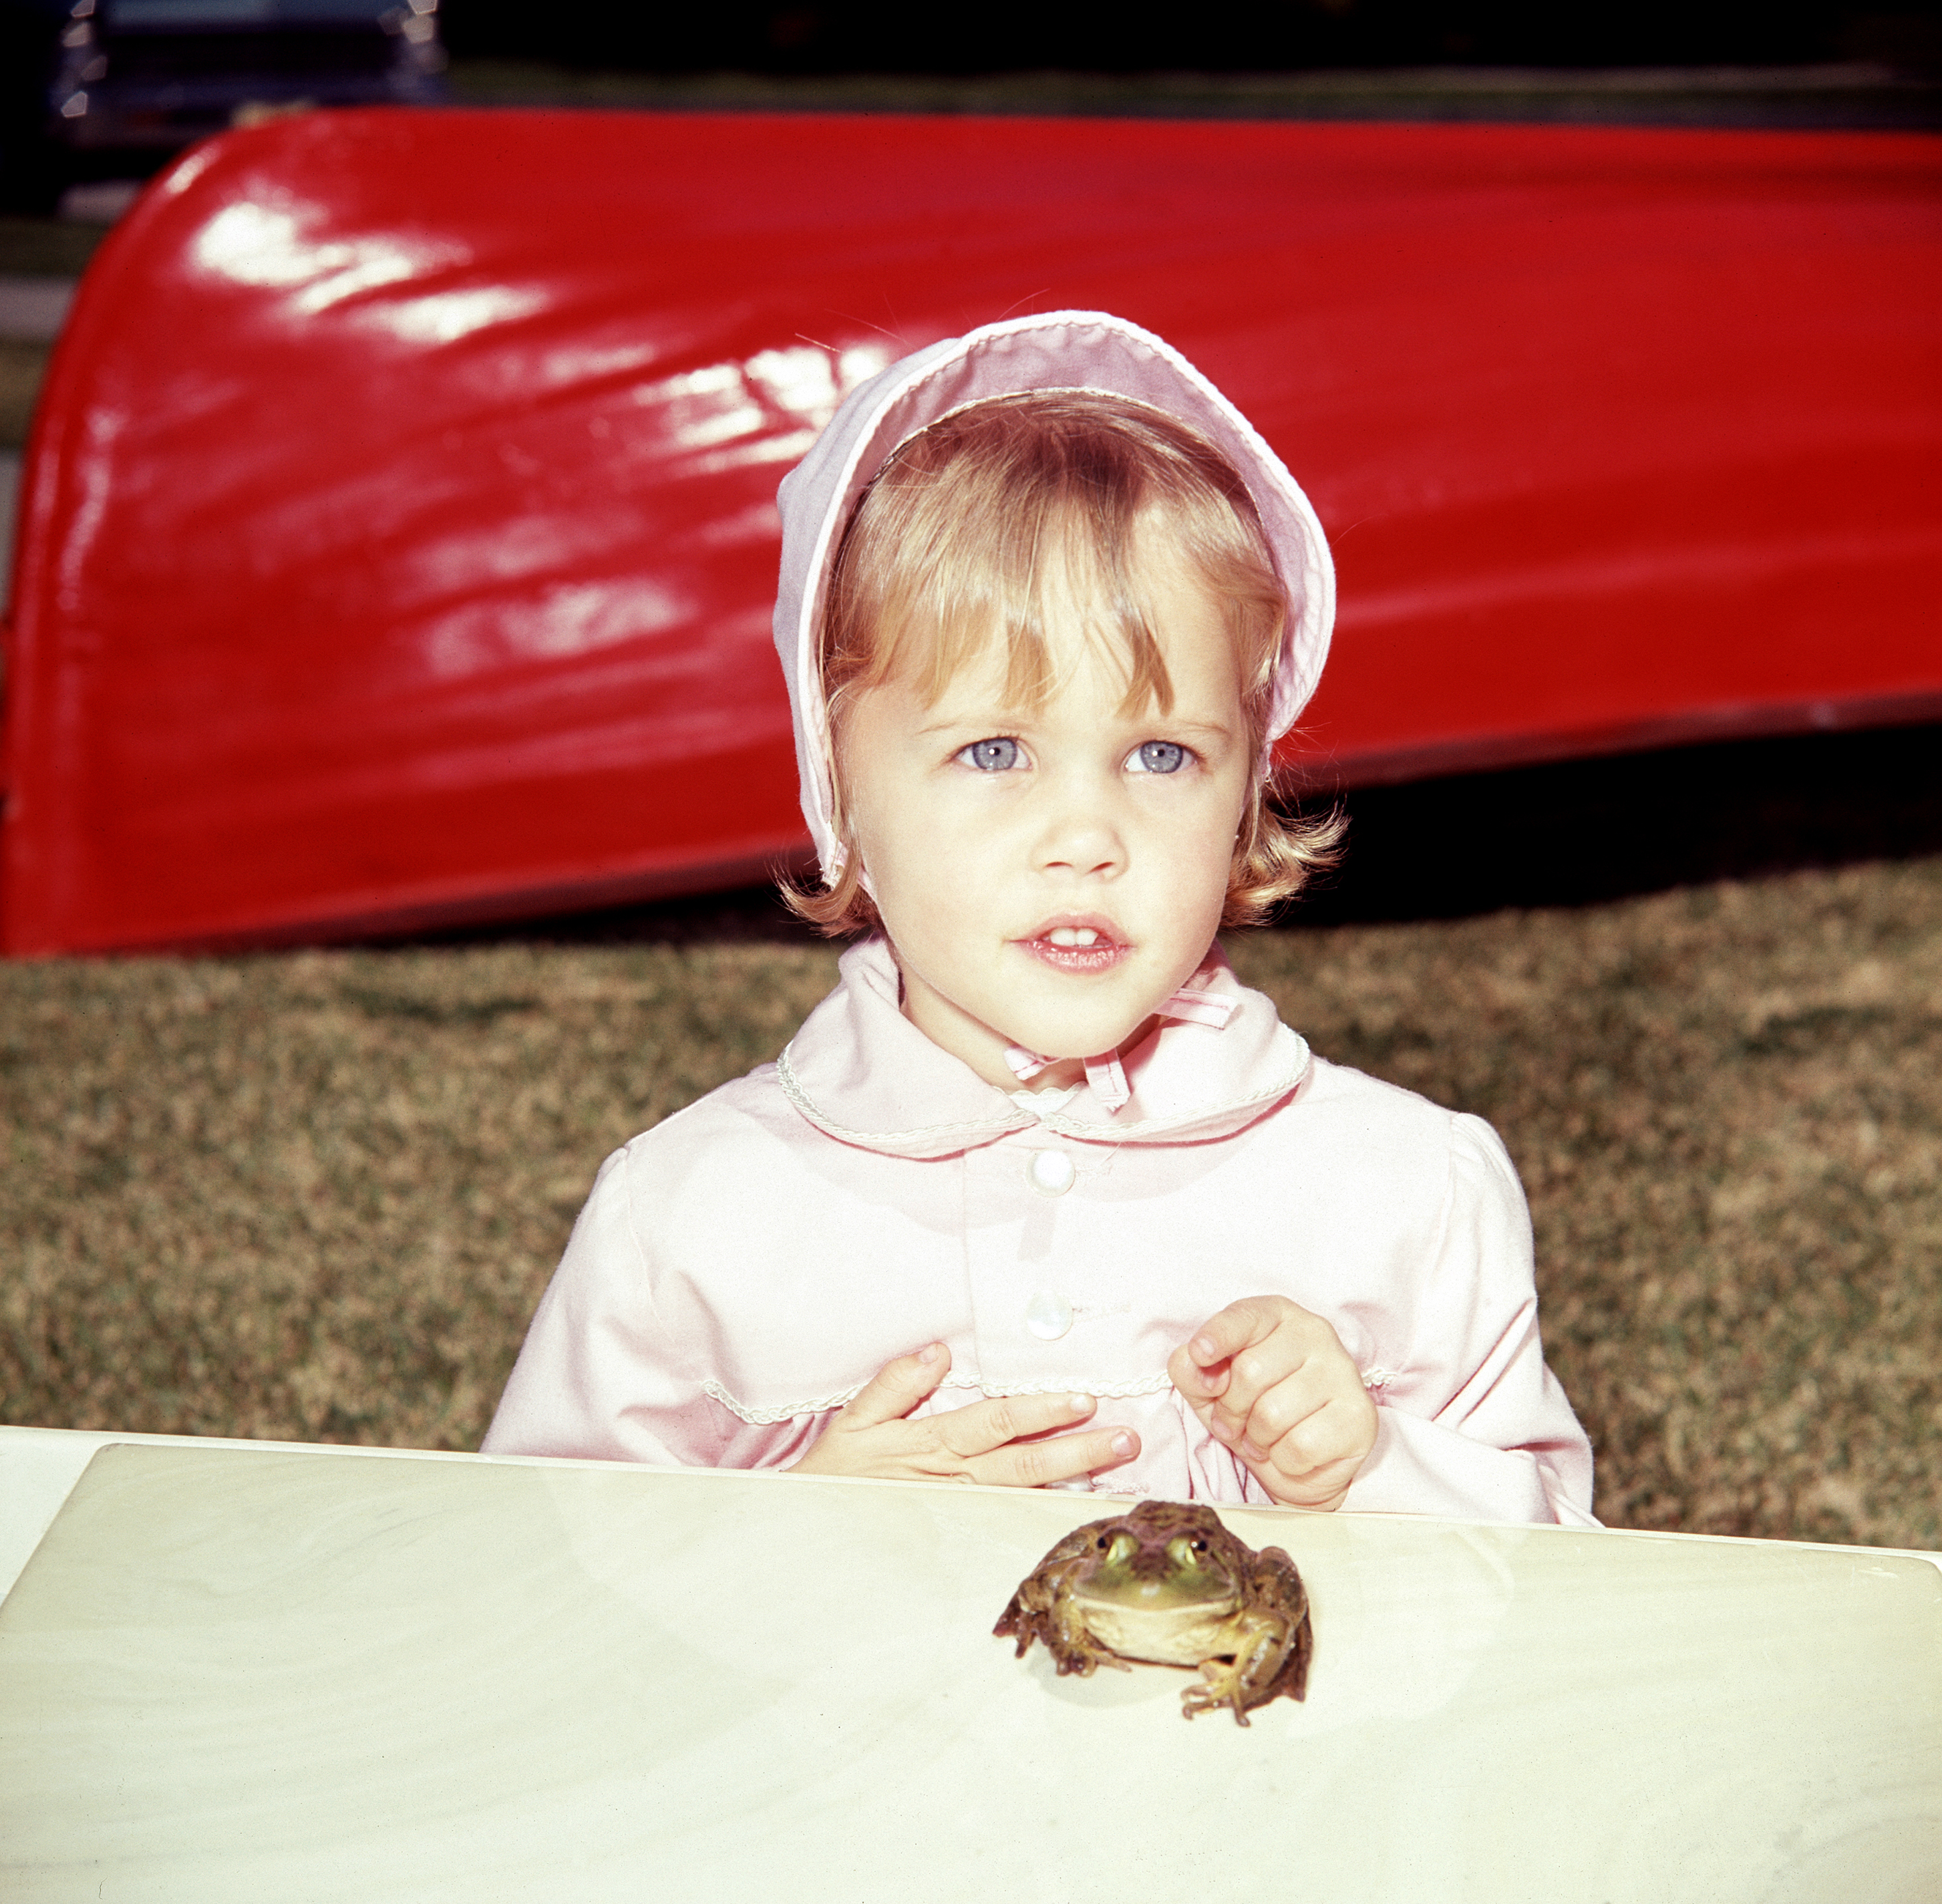 Erin Murphy as Tabitha Stephens on "Bewitched" on April 27, 1967. | Source: Getty Images